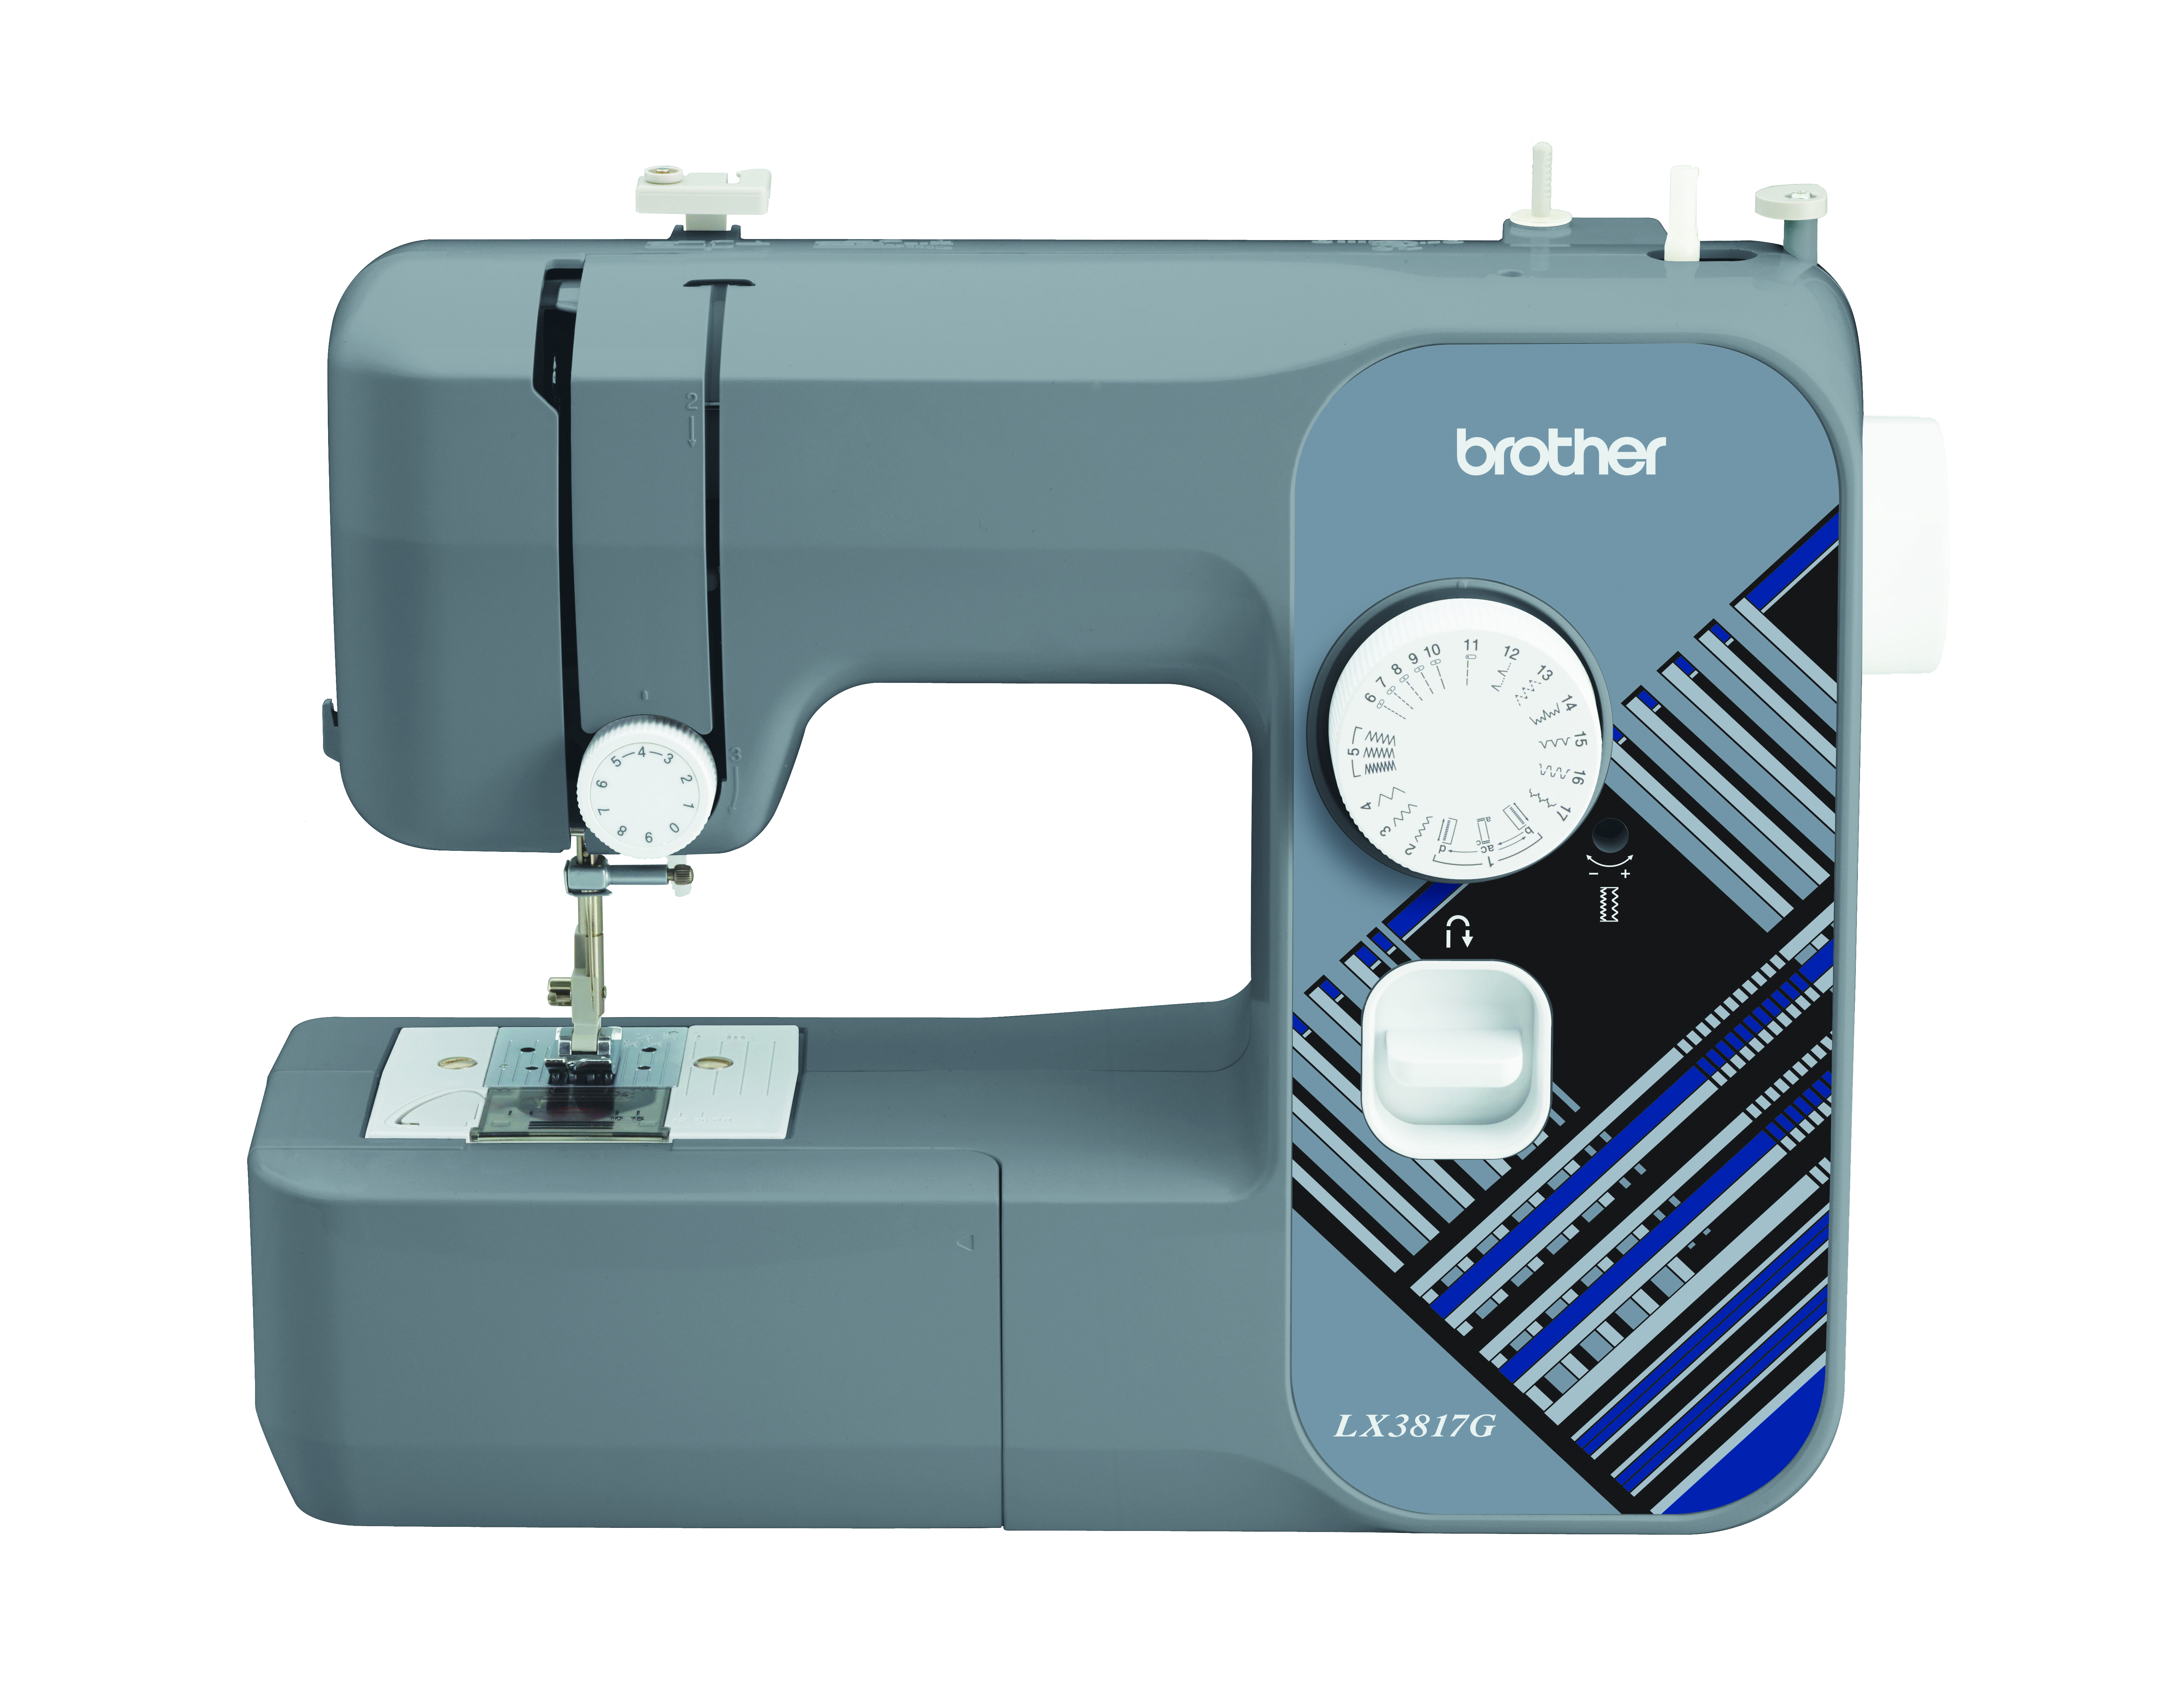 970118521M Brother Electric Sewing Machine with 37 Built-In Stitches and  Automatic Threading